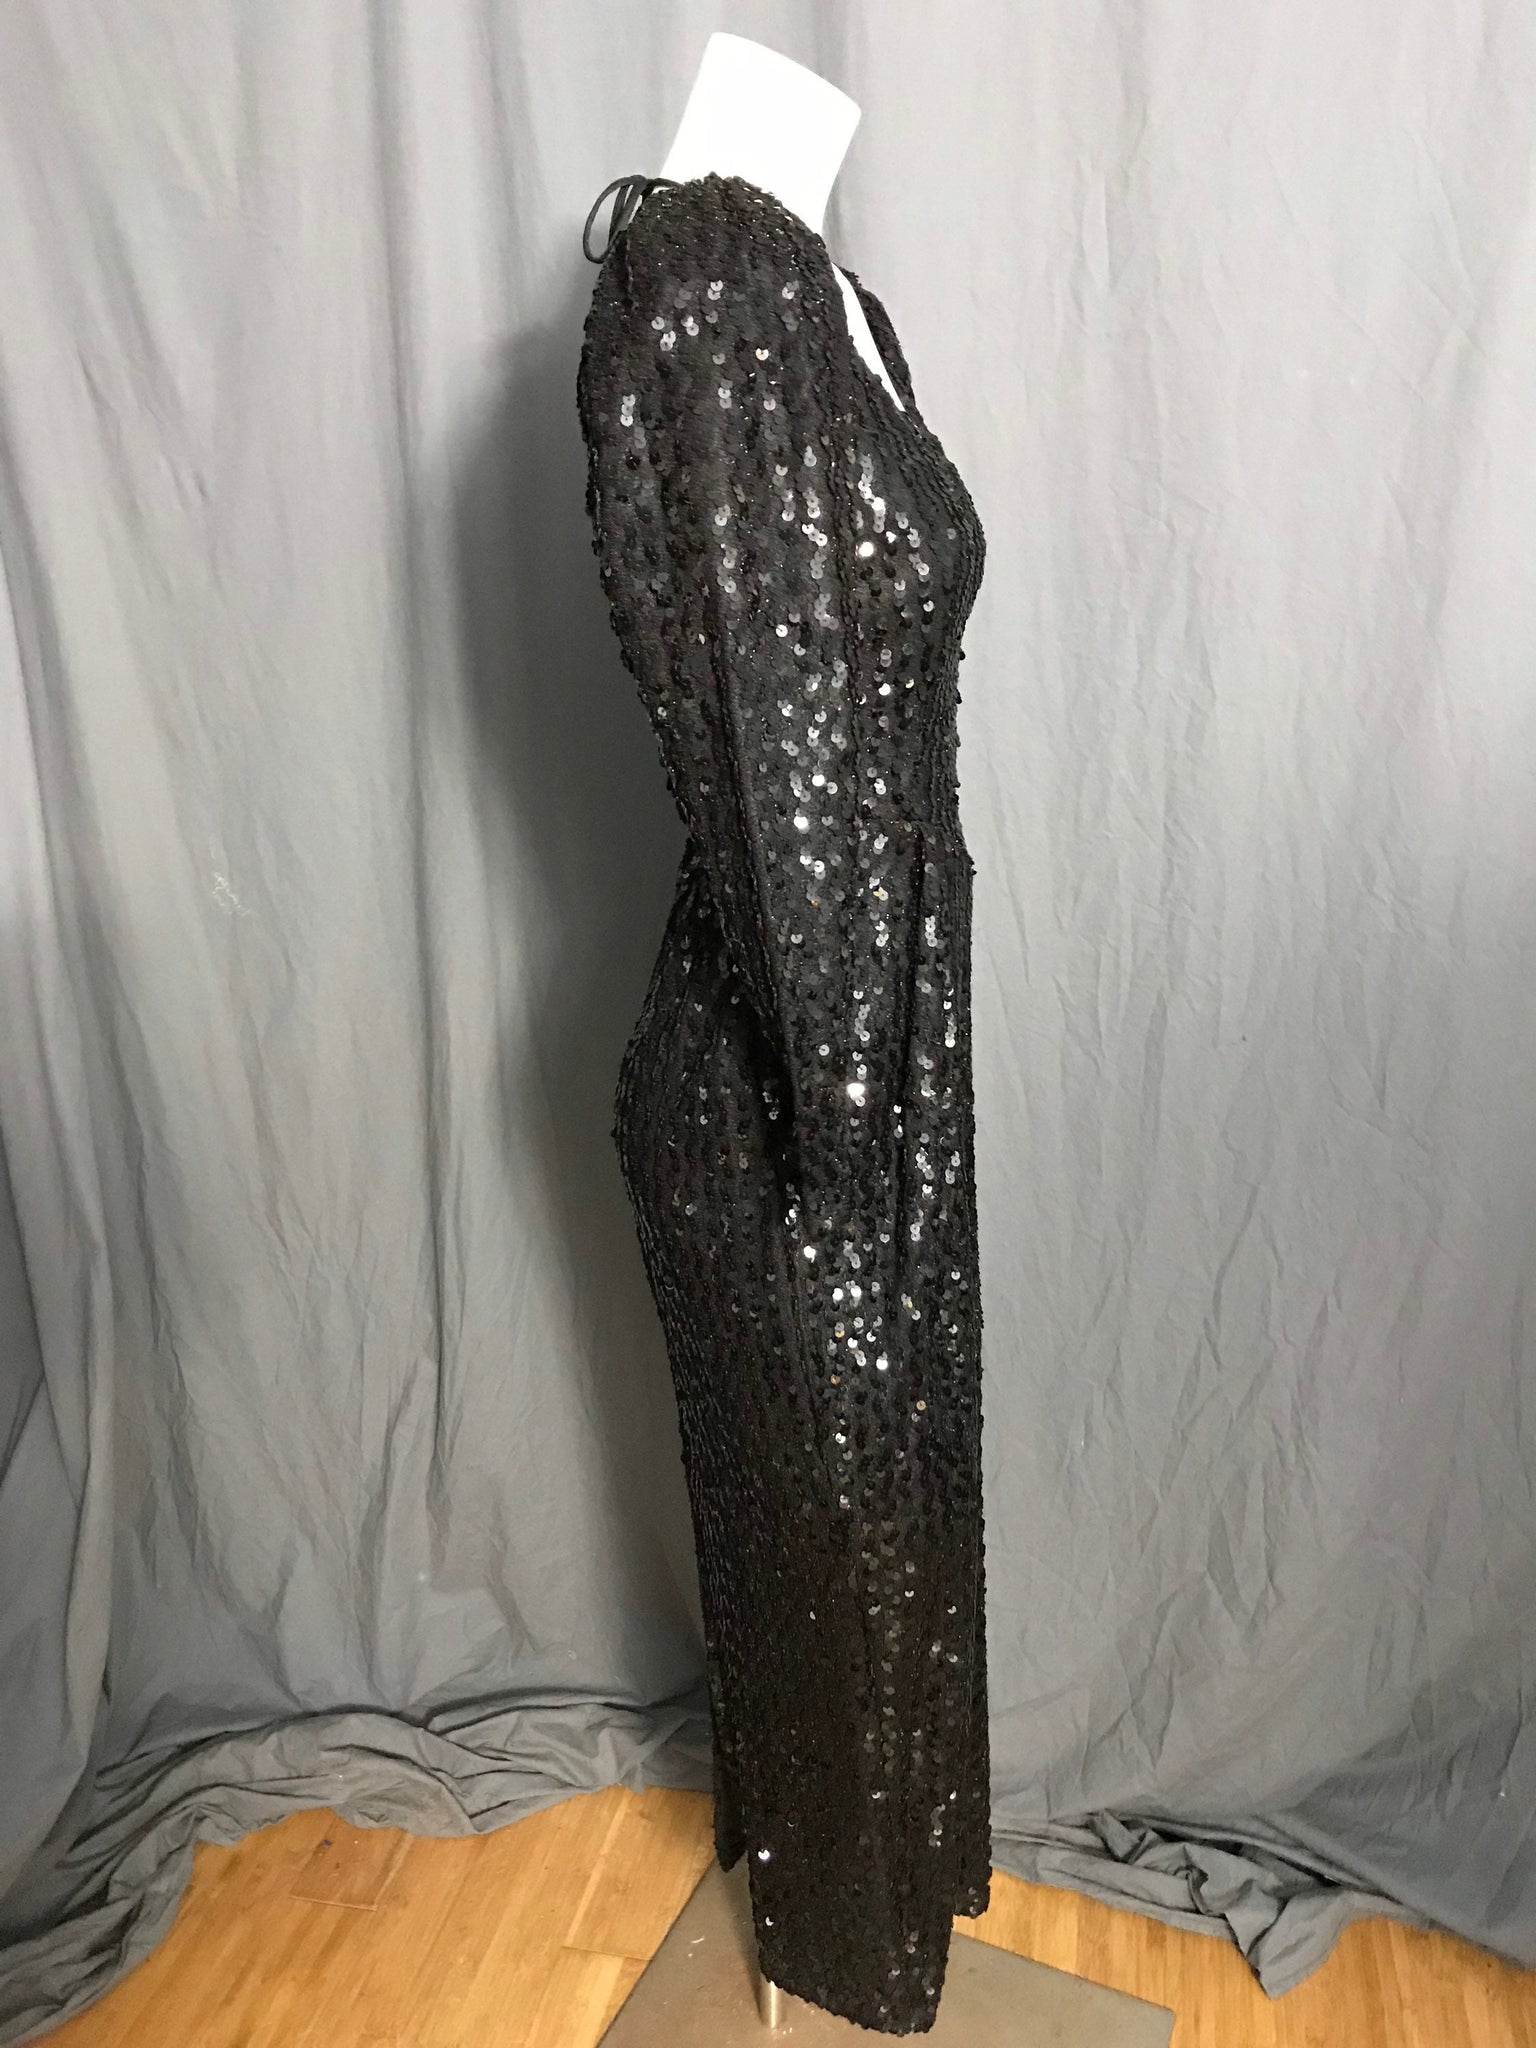 Vintage 1980’s black sequin David Howard for Climax fitted dress 5/6 S